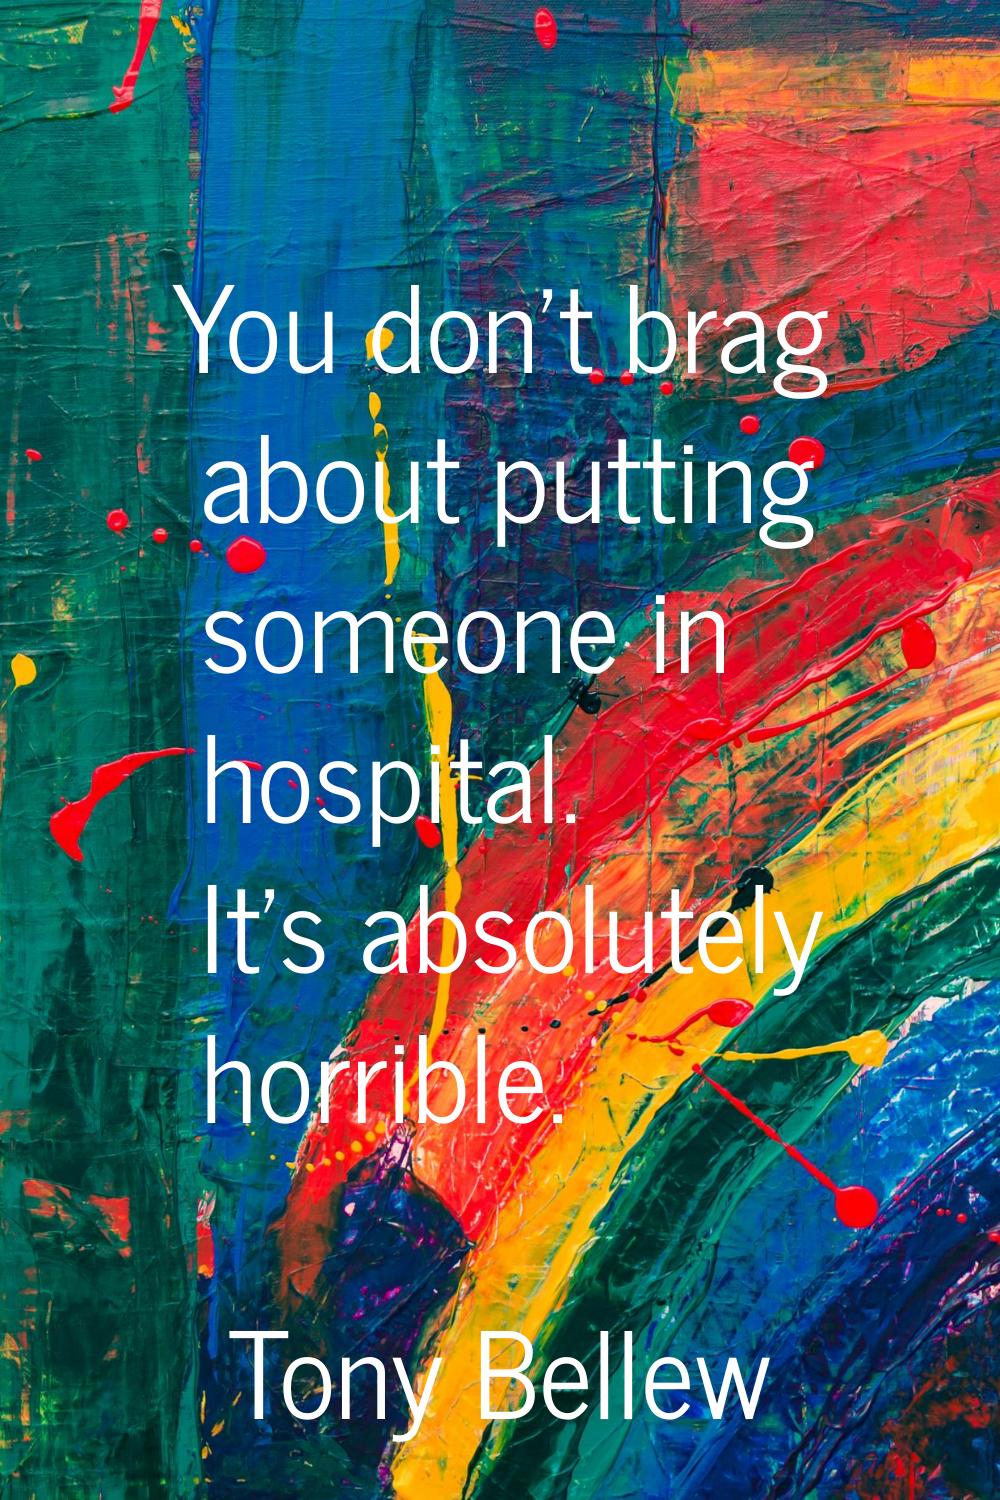 You don't brag about putting someone in hospital. It's absolutely horrible.